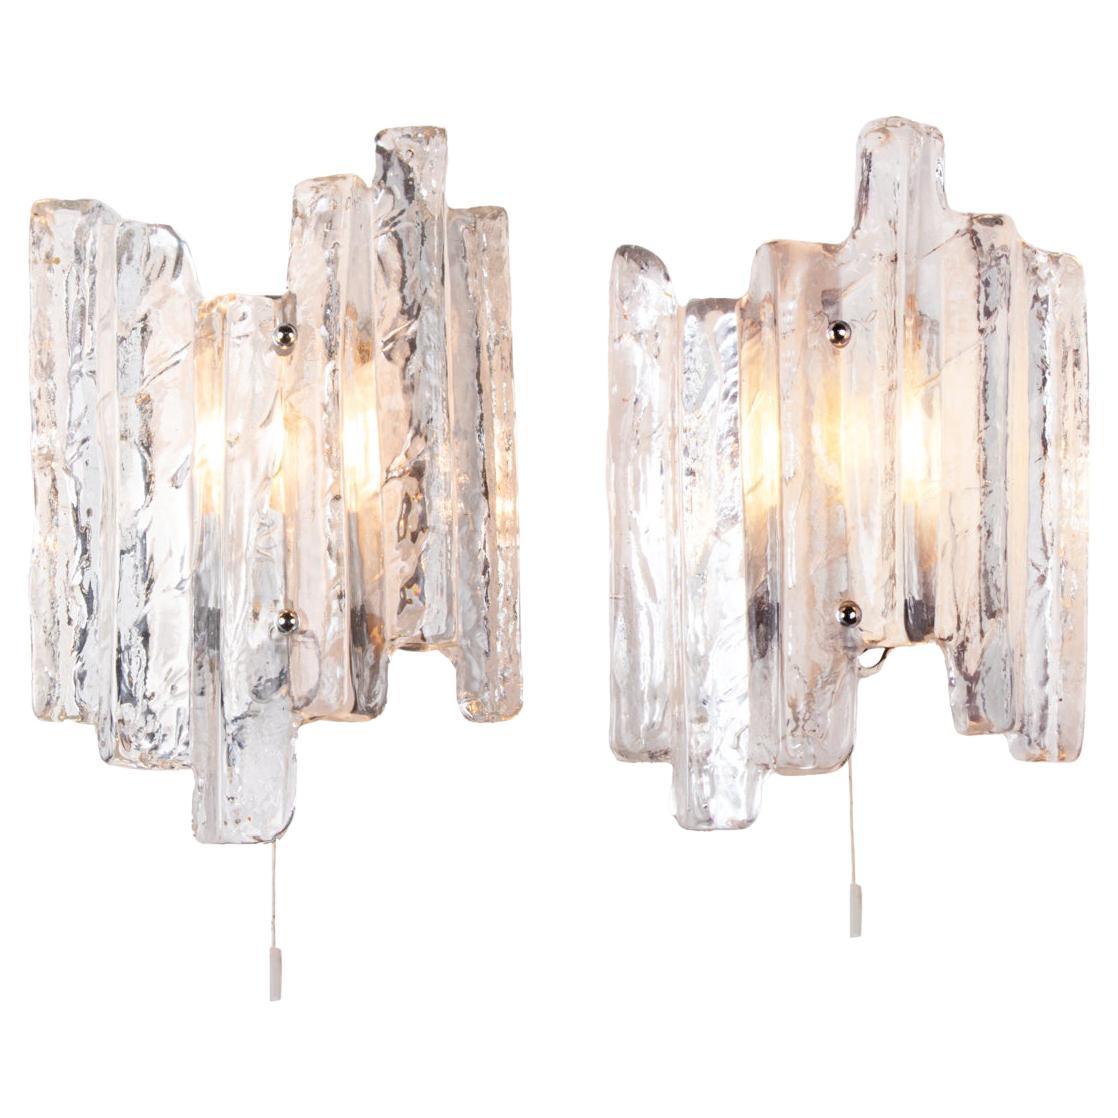 1 (of 2) Pair of  Kalmar Wall Sconces Frosted Glass and Chrome, Austria 1960s